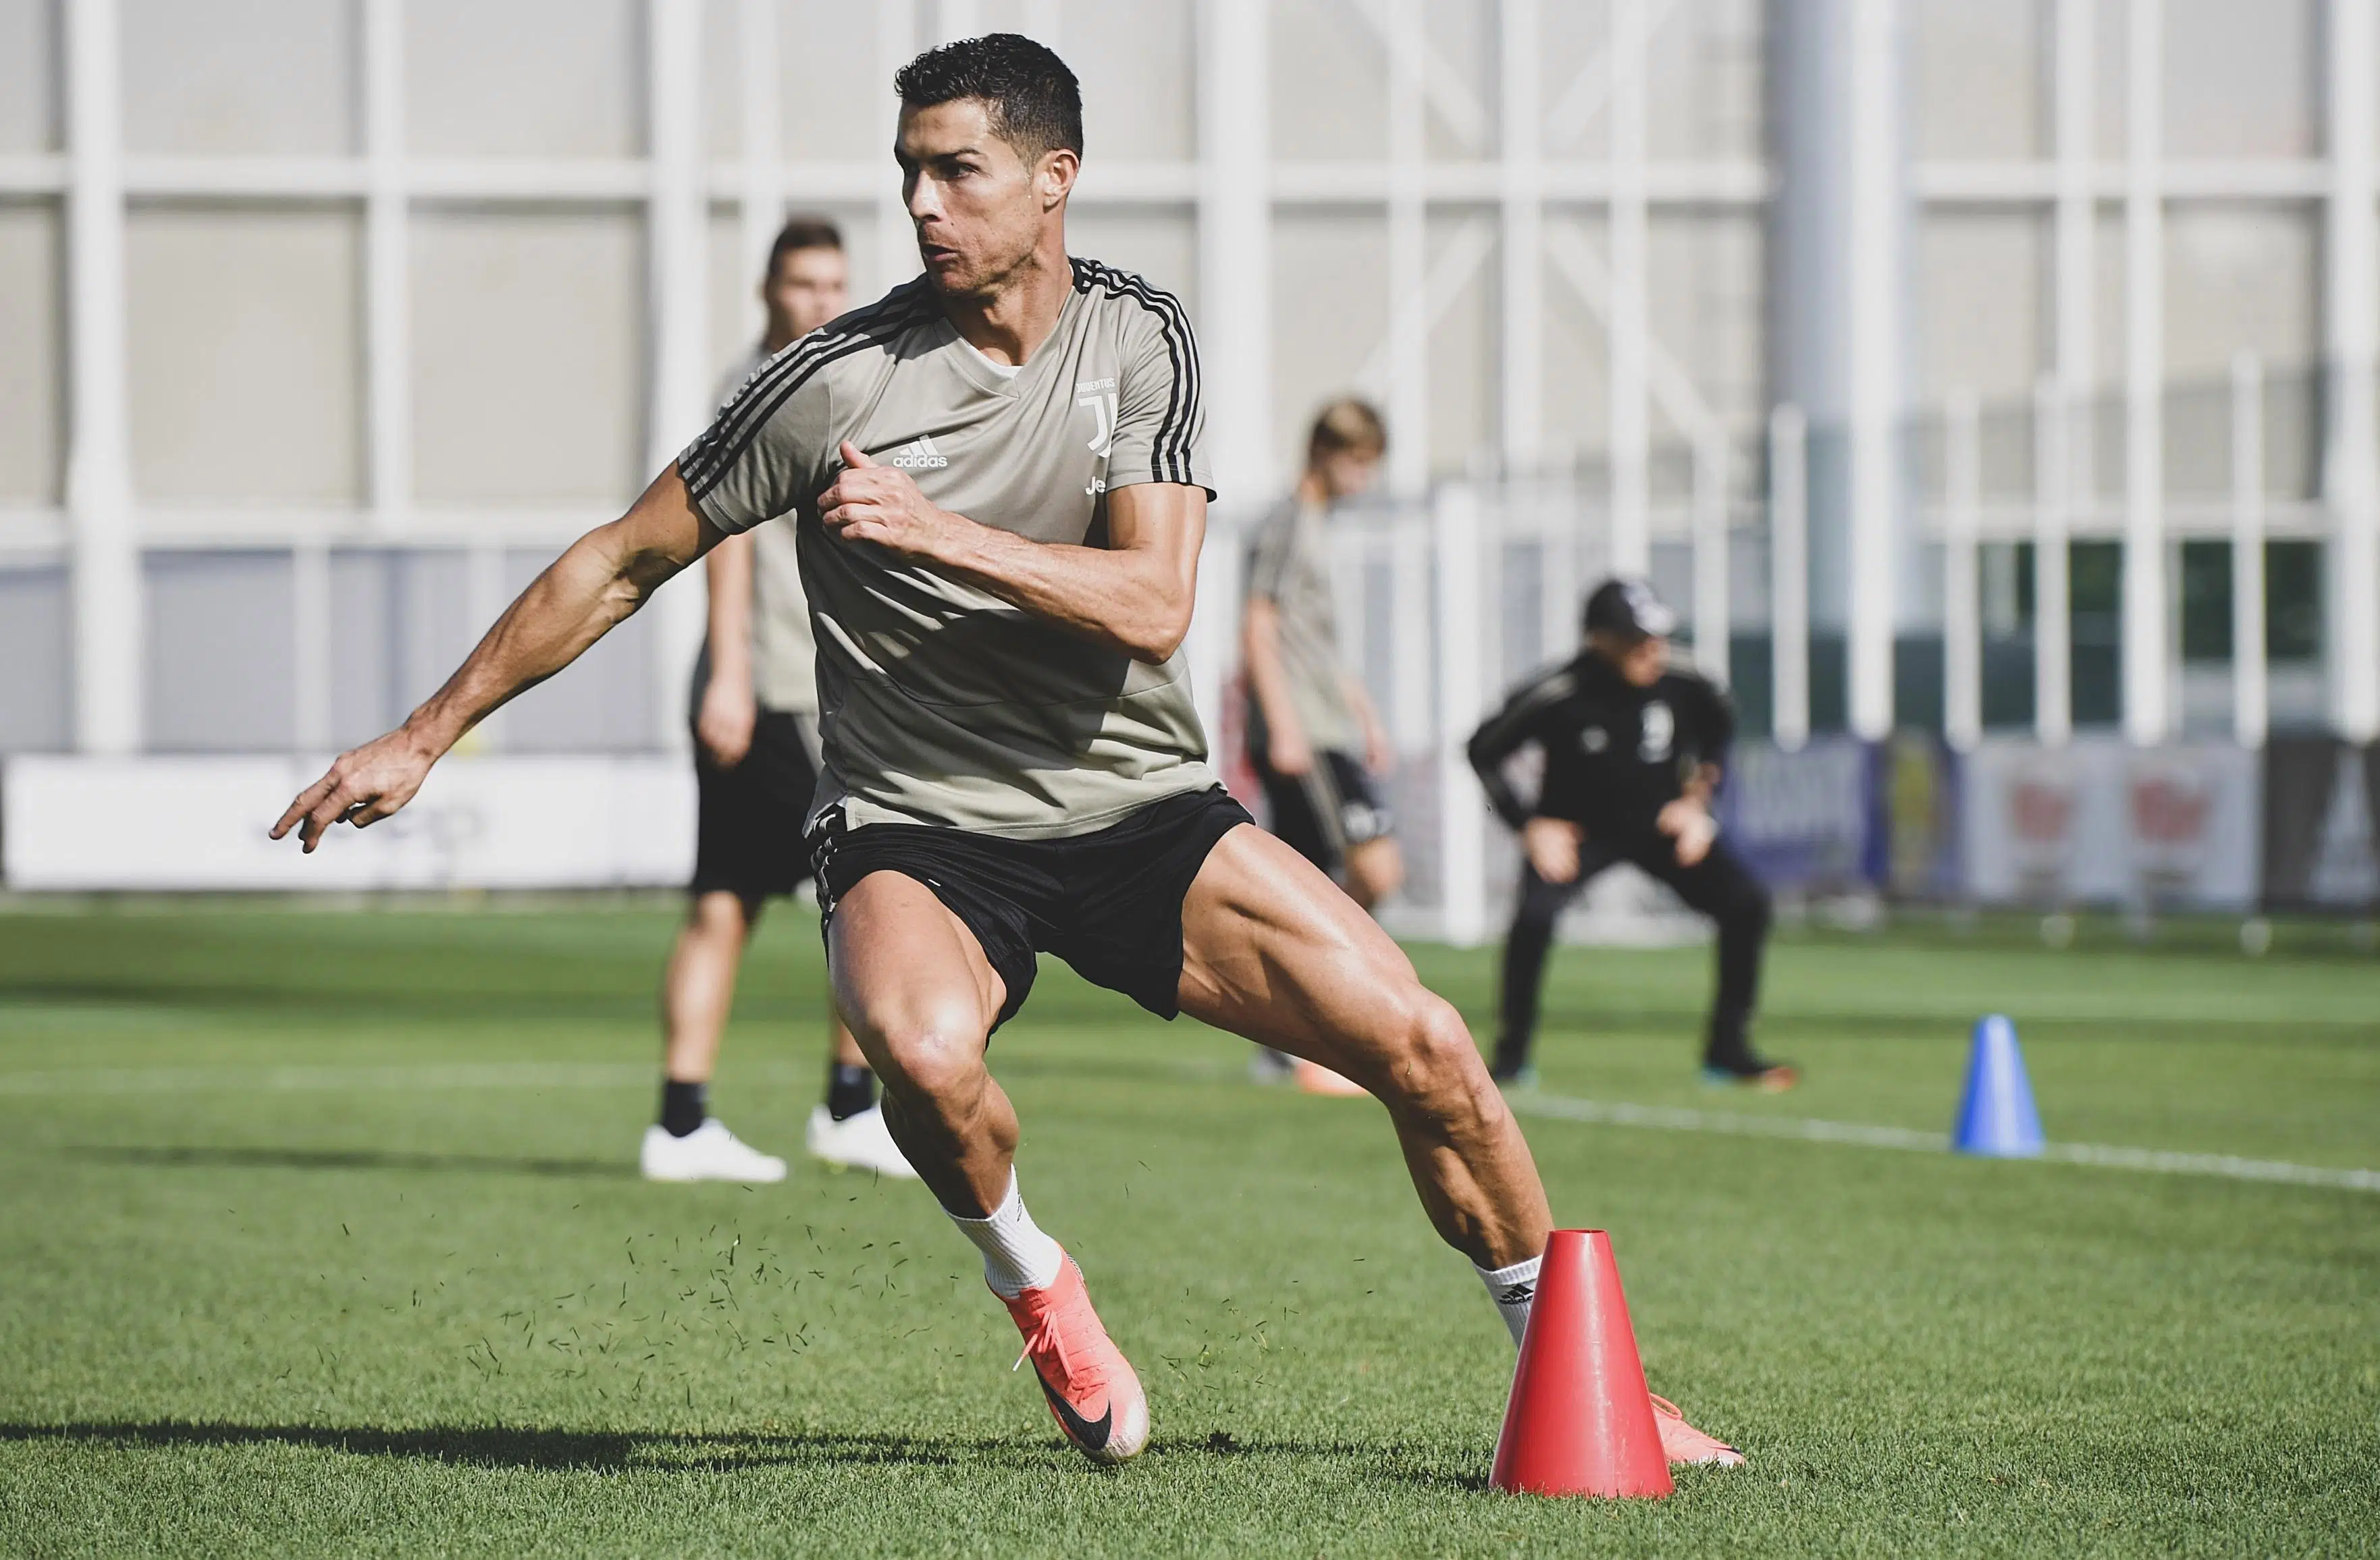 How To Be Fit Like Cristiano Ronaldo